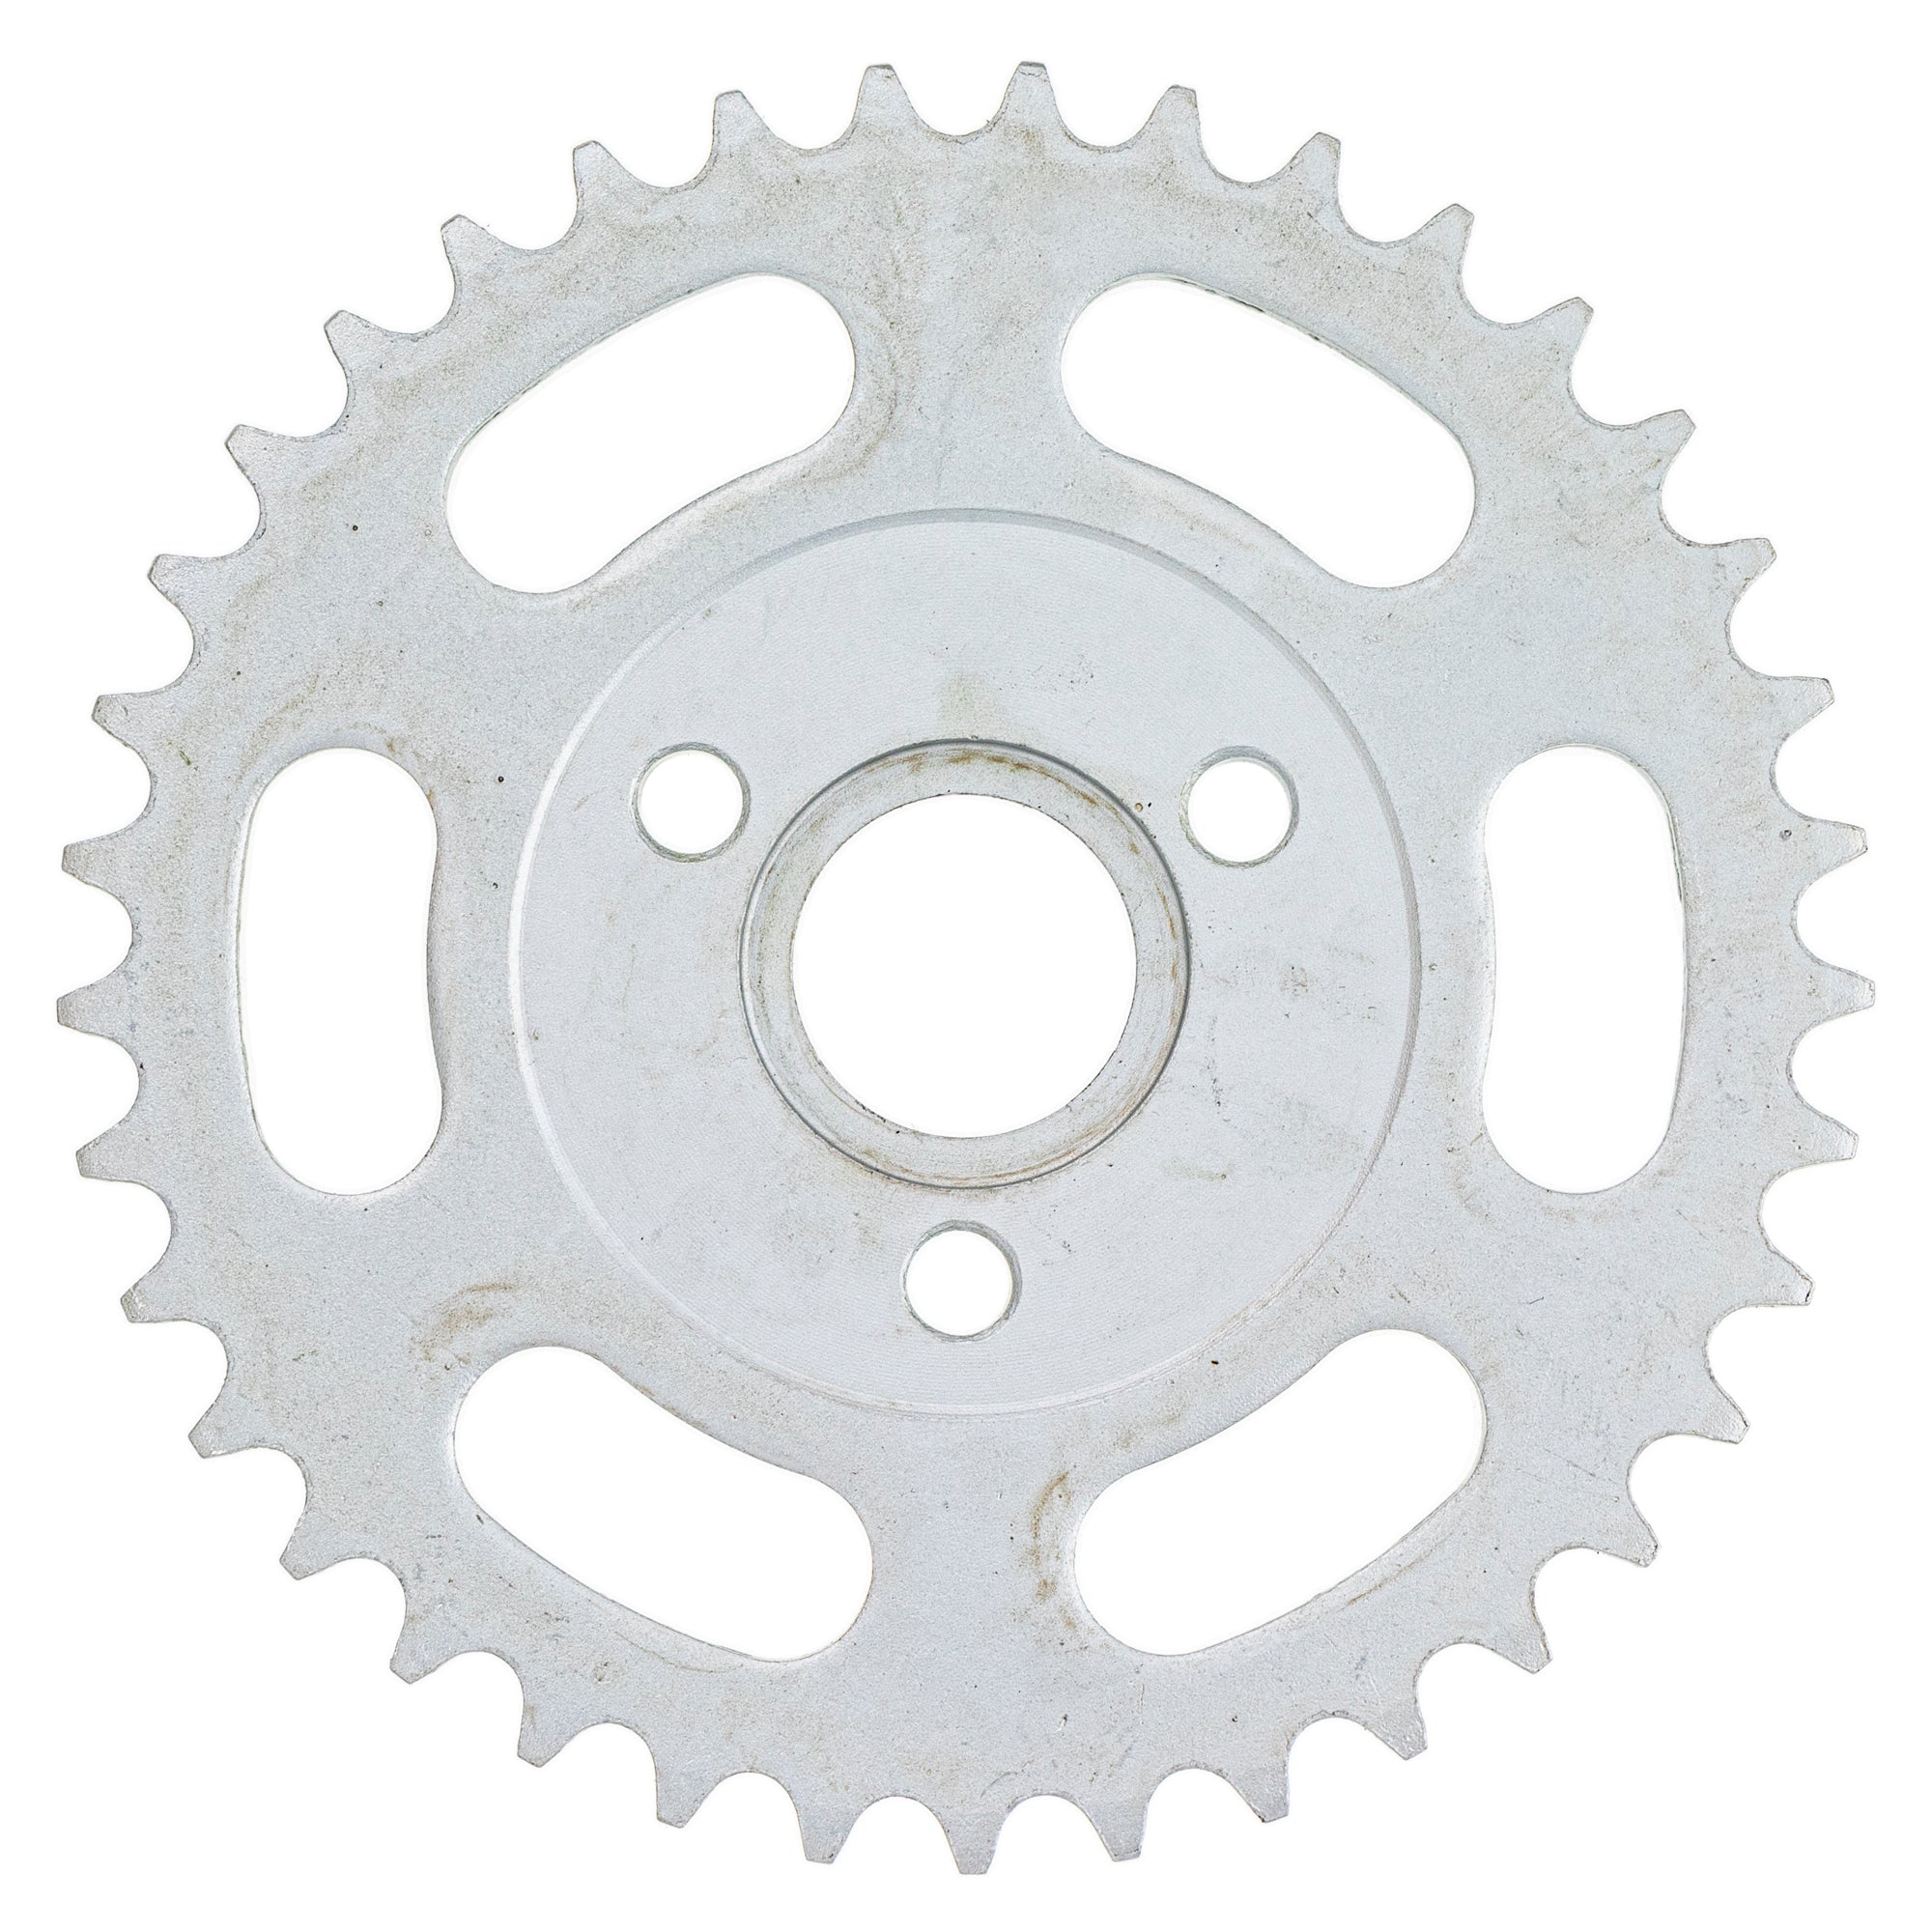 420 Pitch Front 14T Rear 37T Drive Sprocket Kit for Honda Z50R